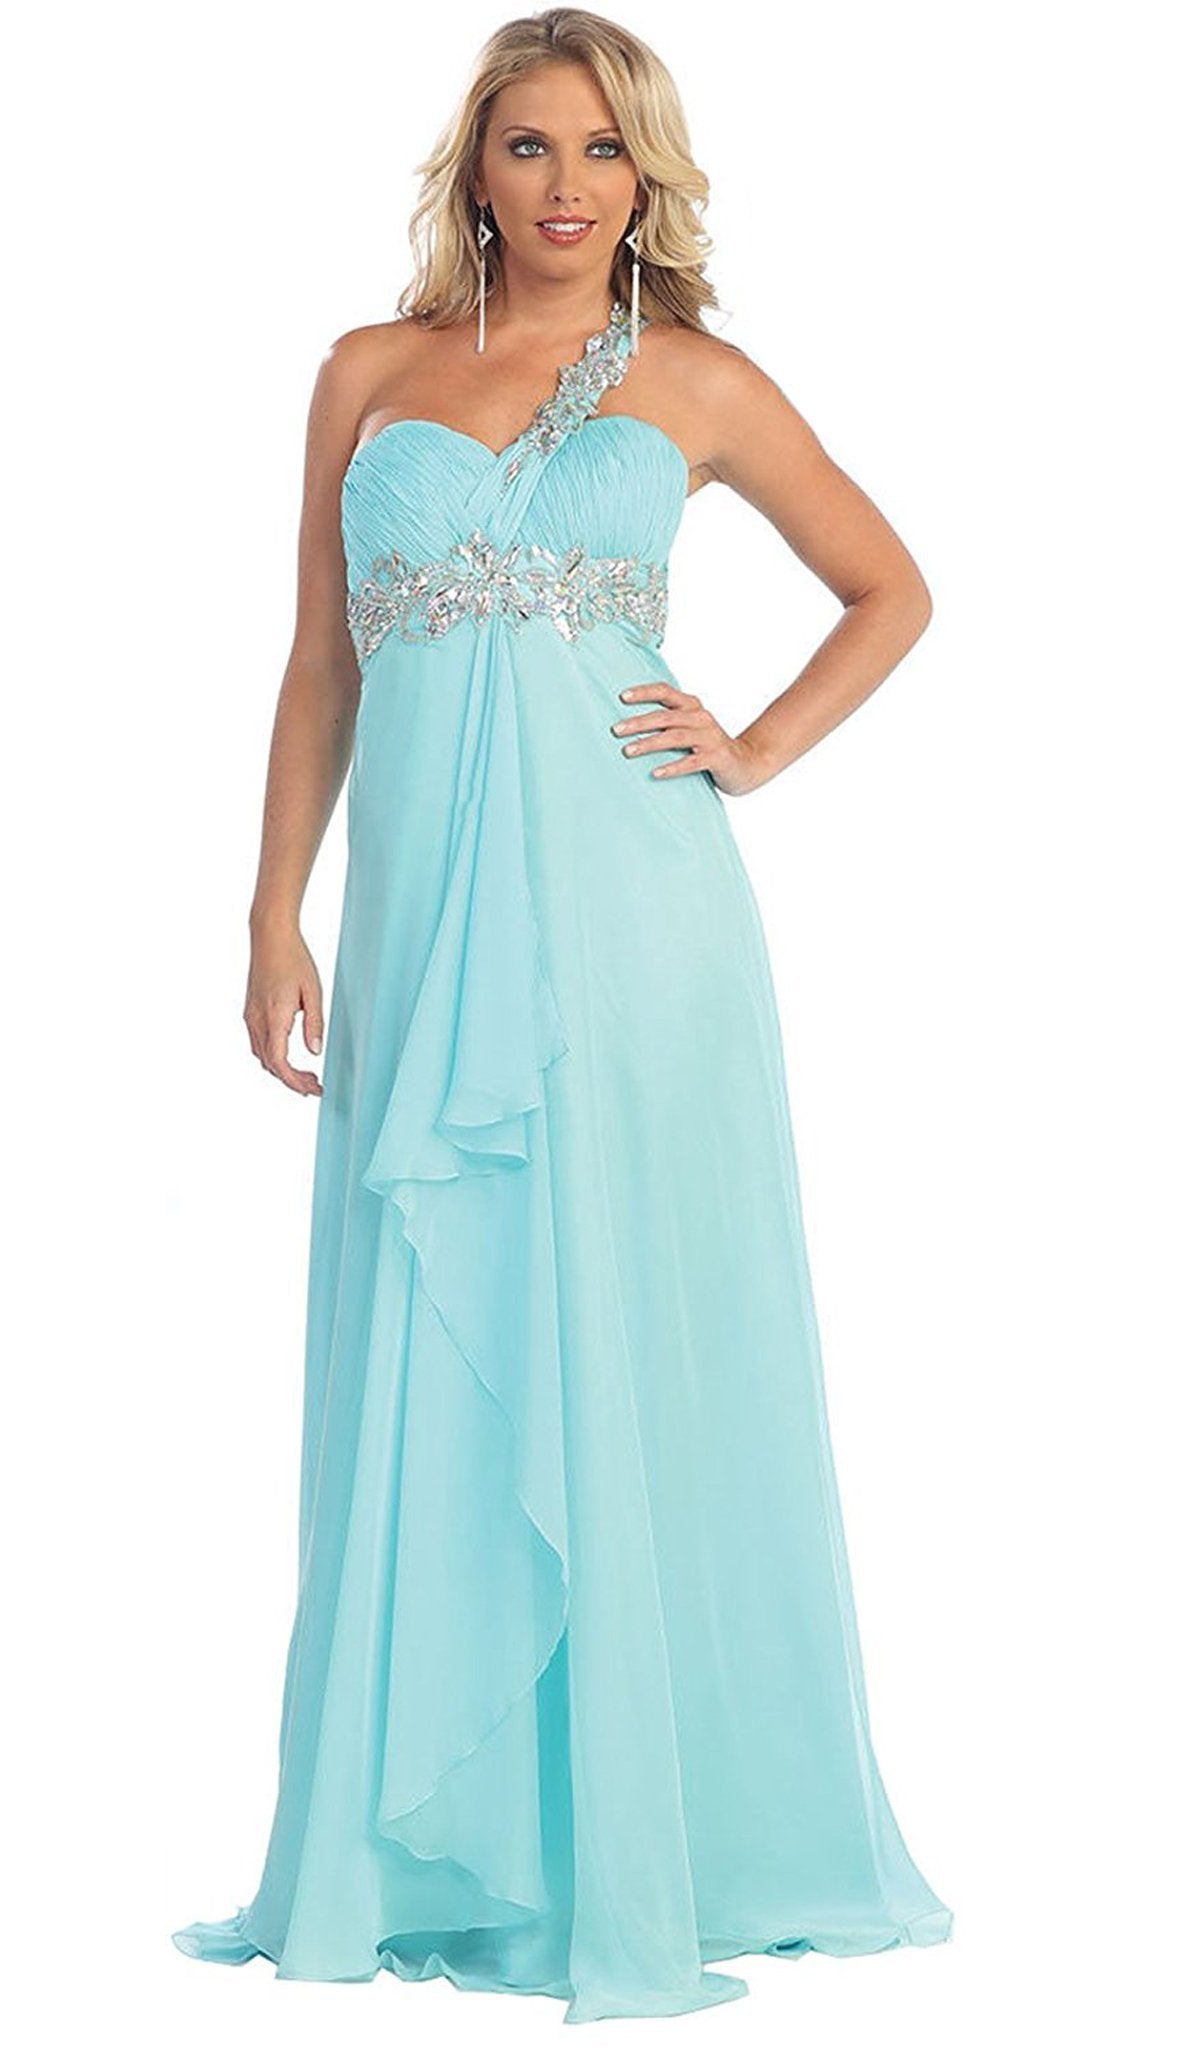 May Queen - MQ1028 Ornate Strap Ruched Sweetheart A-line Prom Dress Special Occasion Dress 4 / Aqua